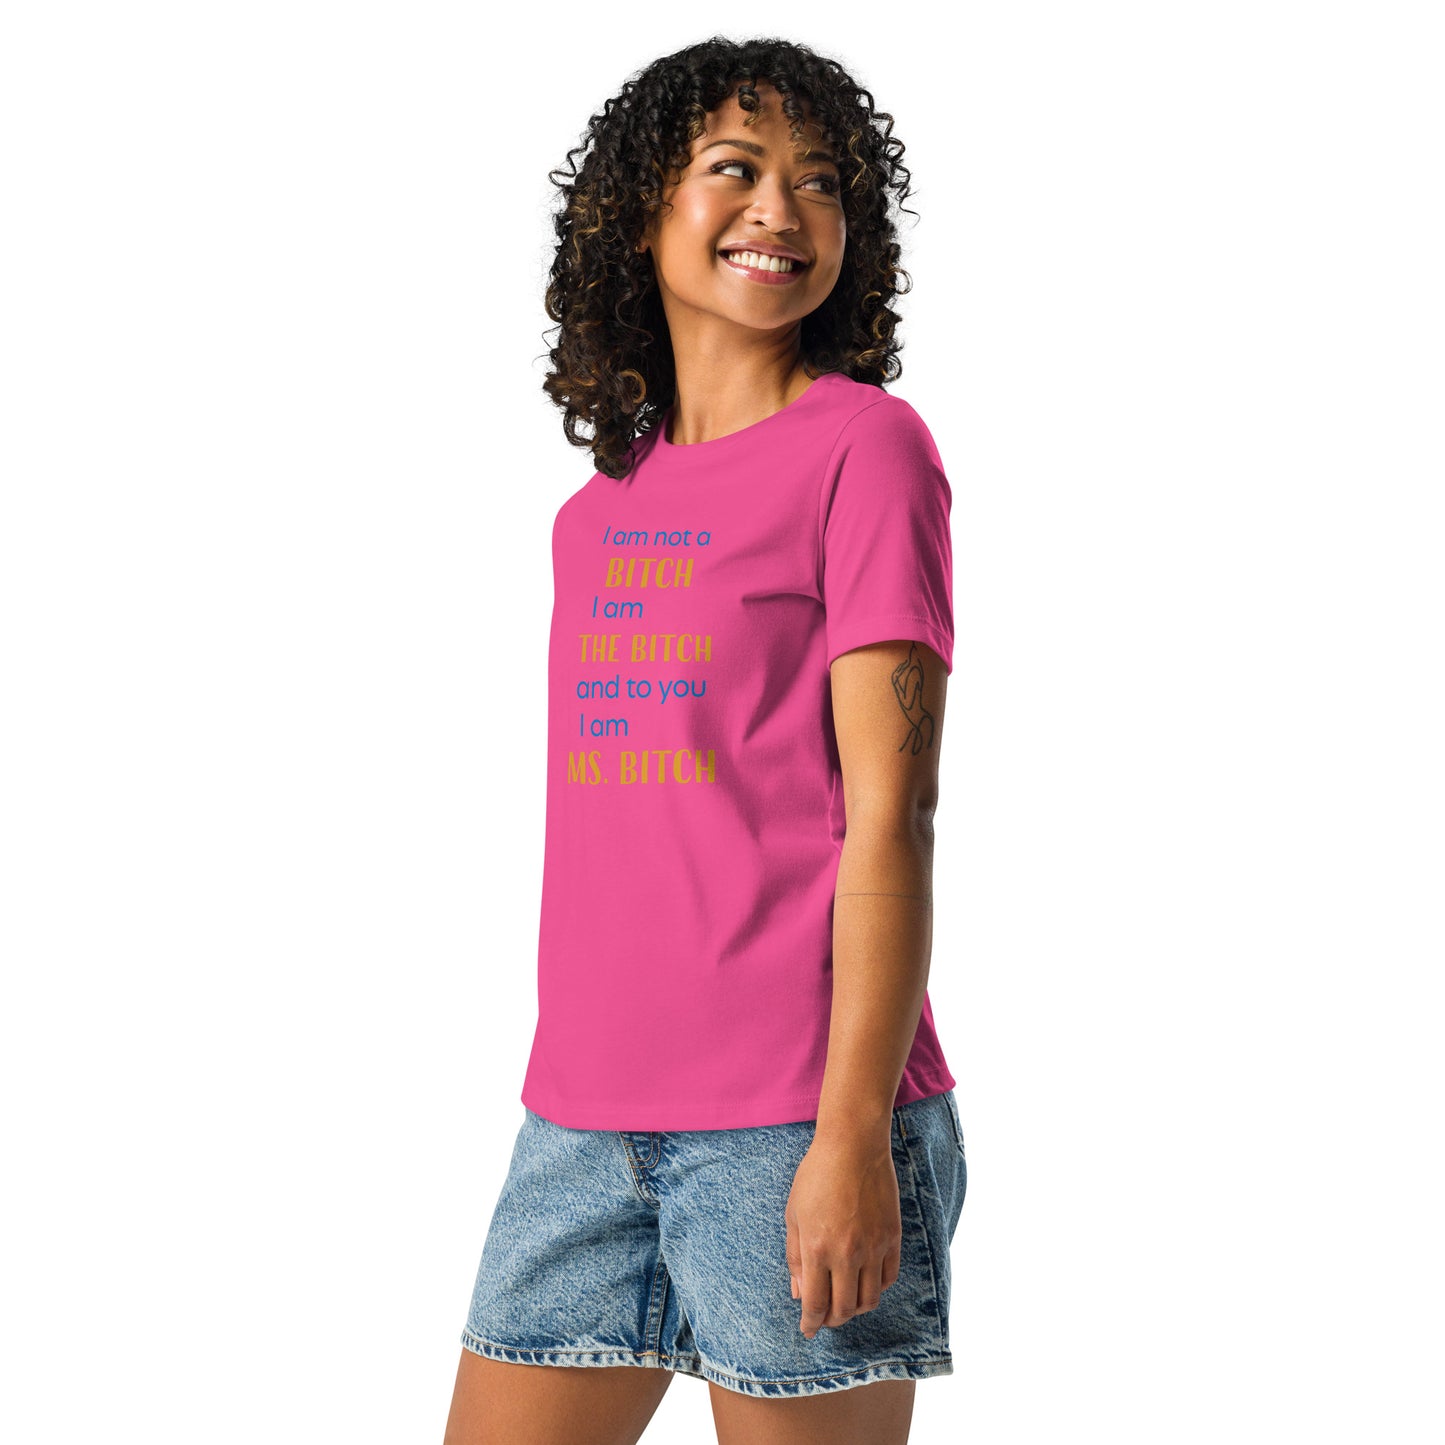 Women with berry t-shirt with the text "to you I'm MS bitch"